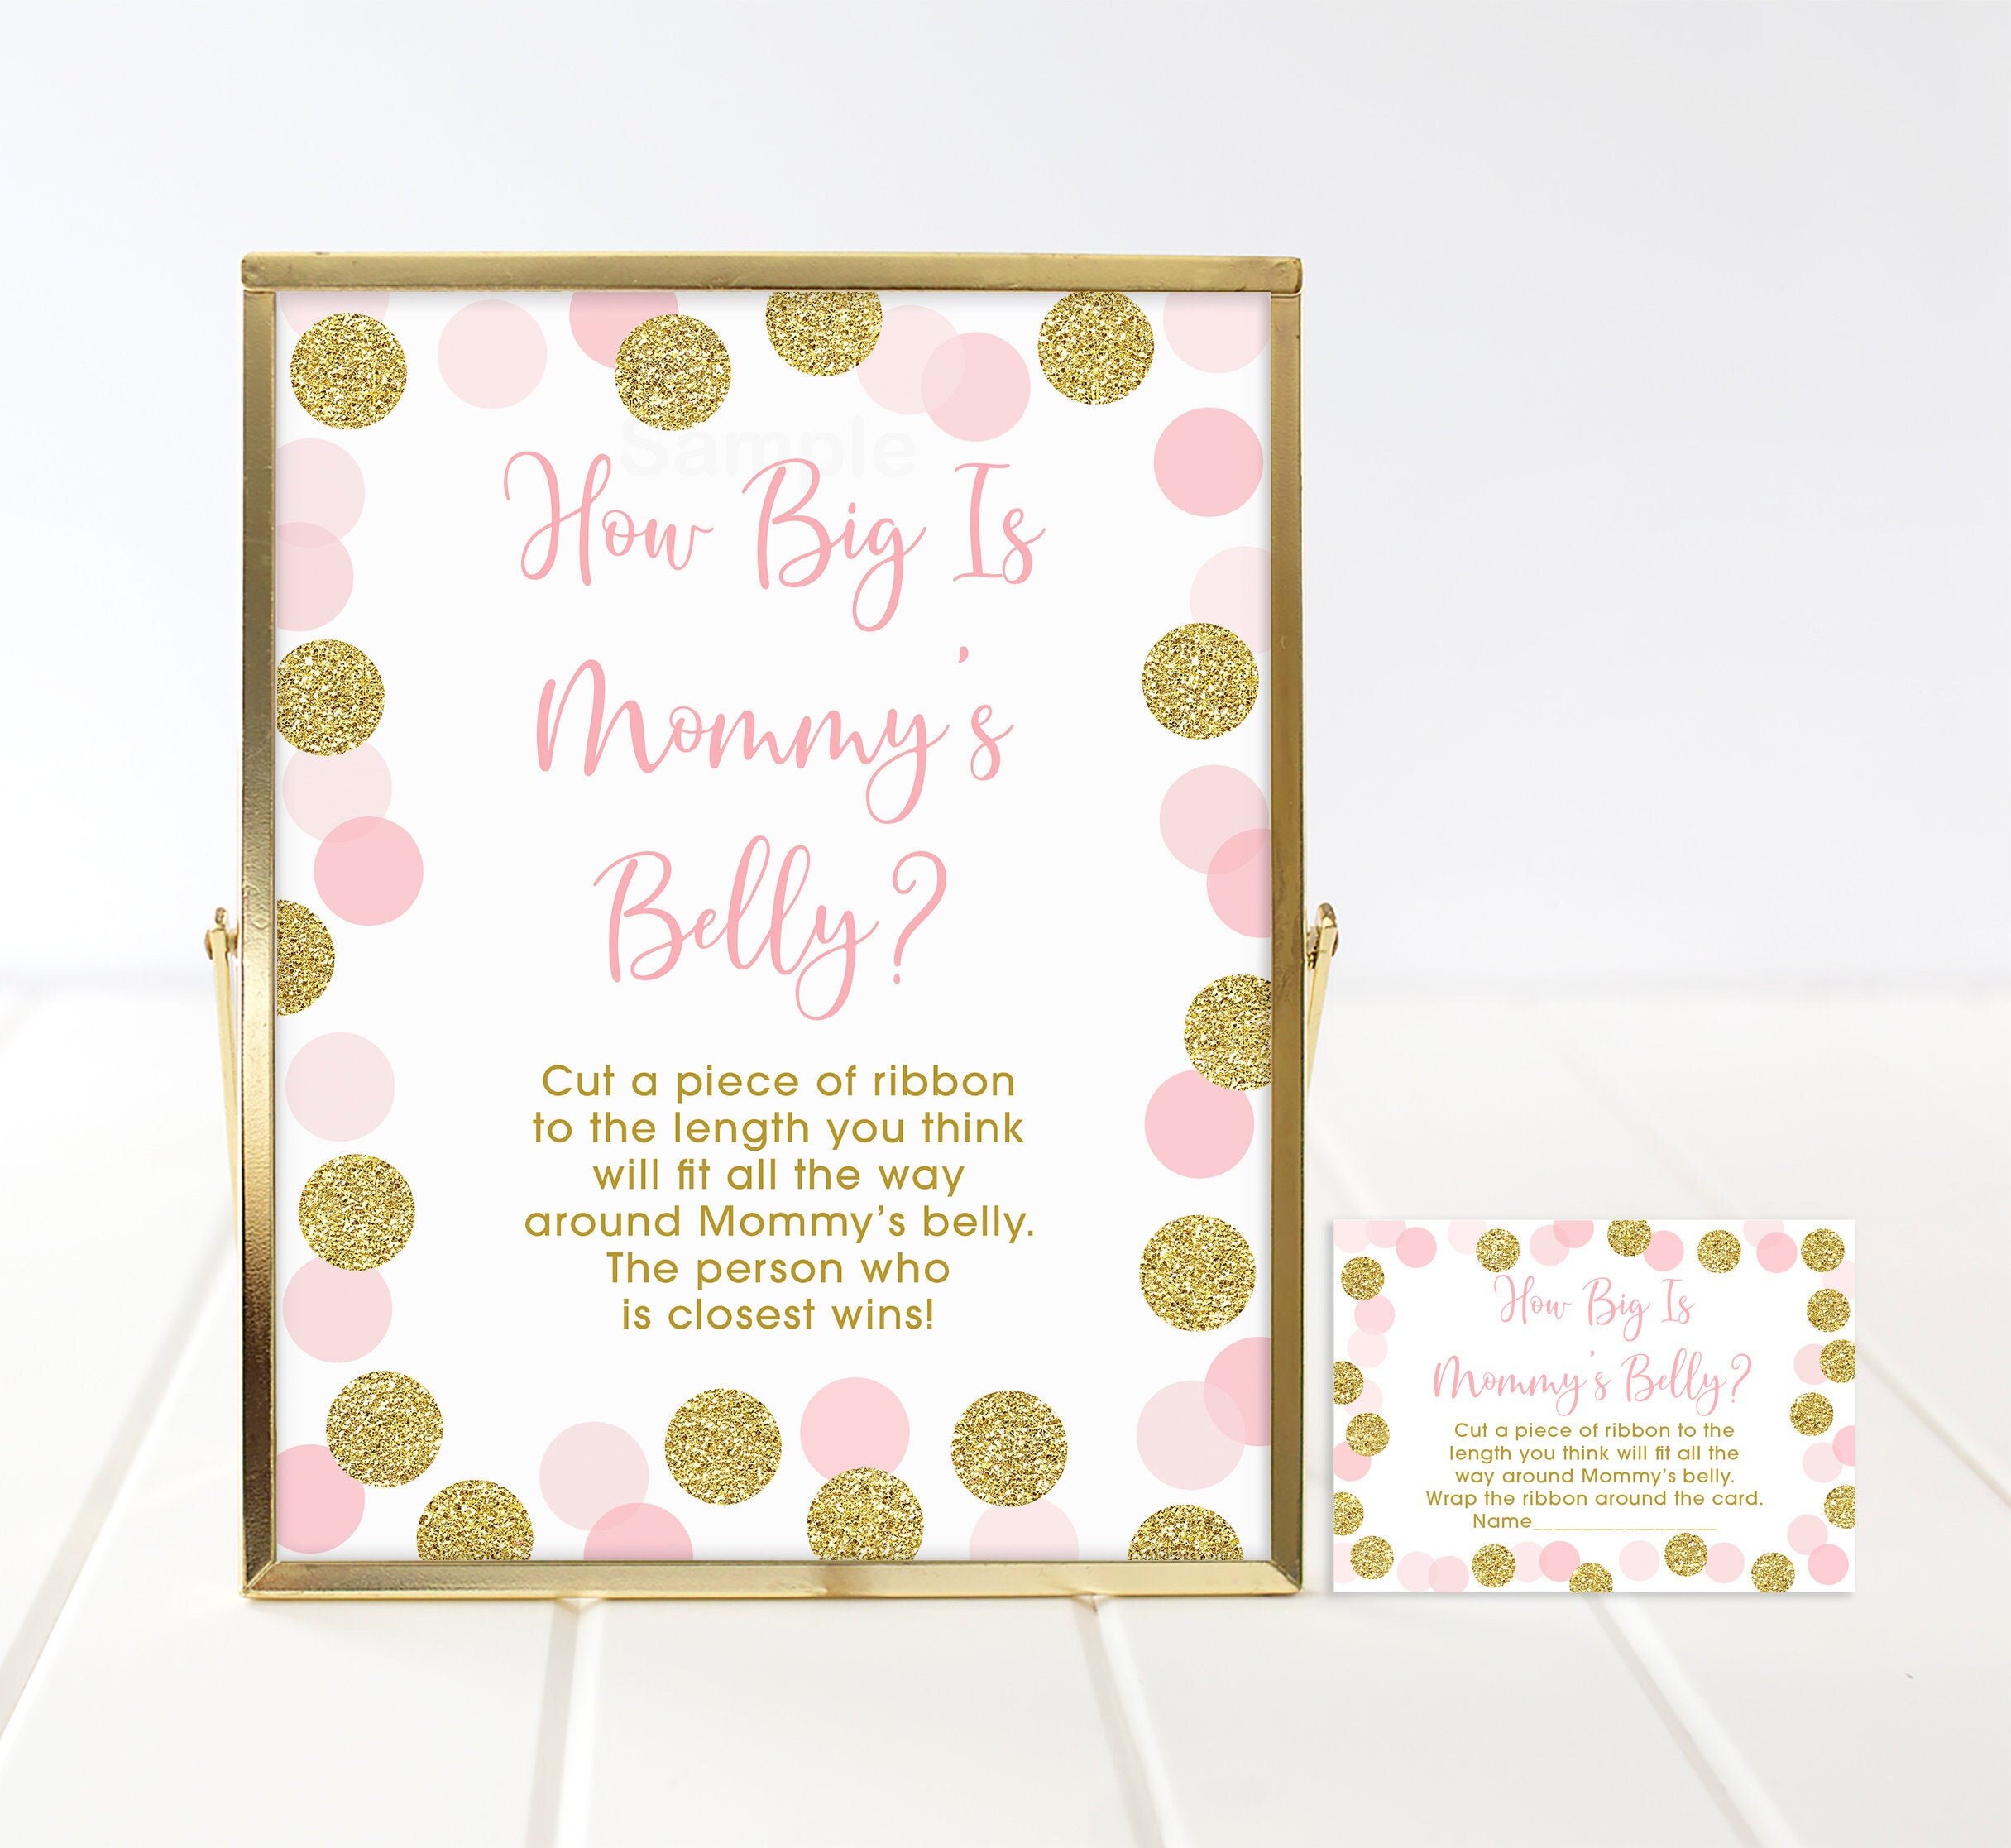 Blush Pink & Gold Glitter Dots How Big Is Mommys Belly Baby Shower Game